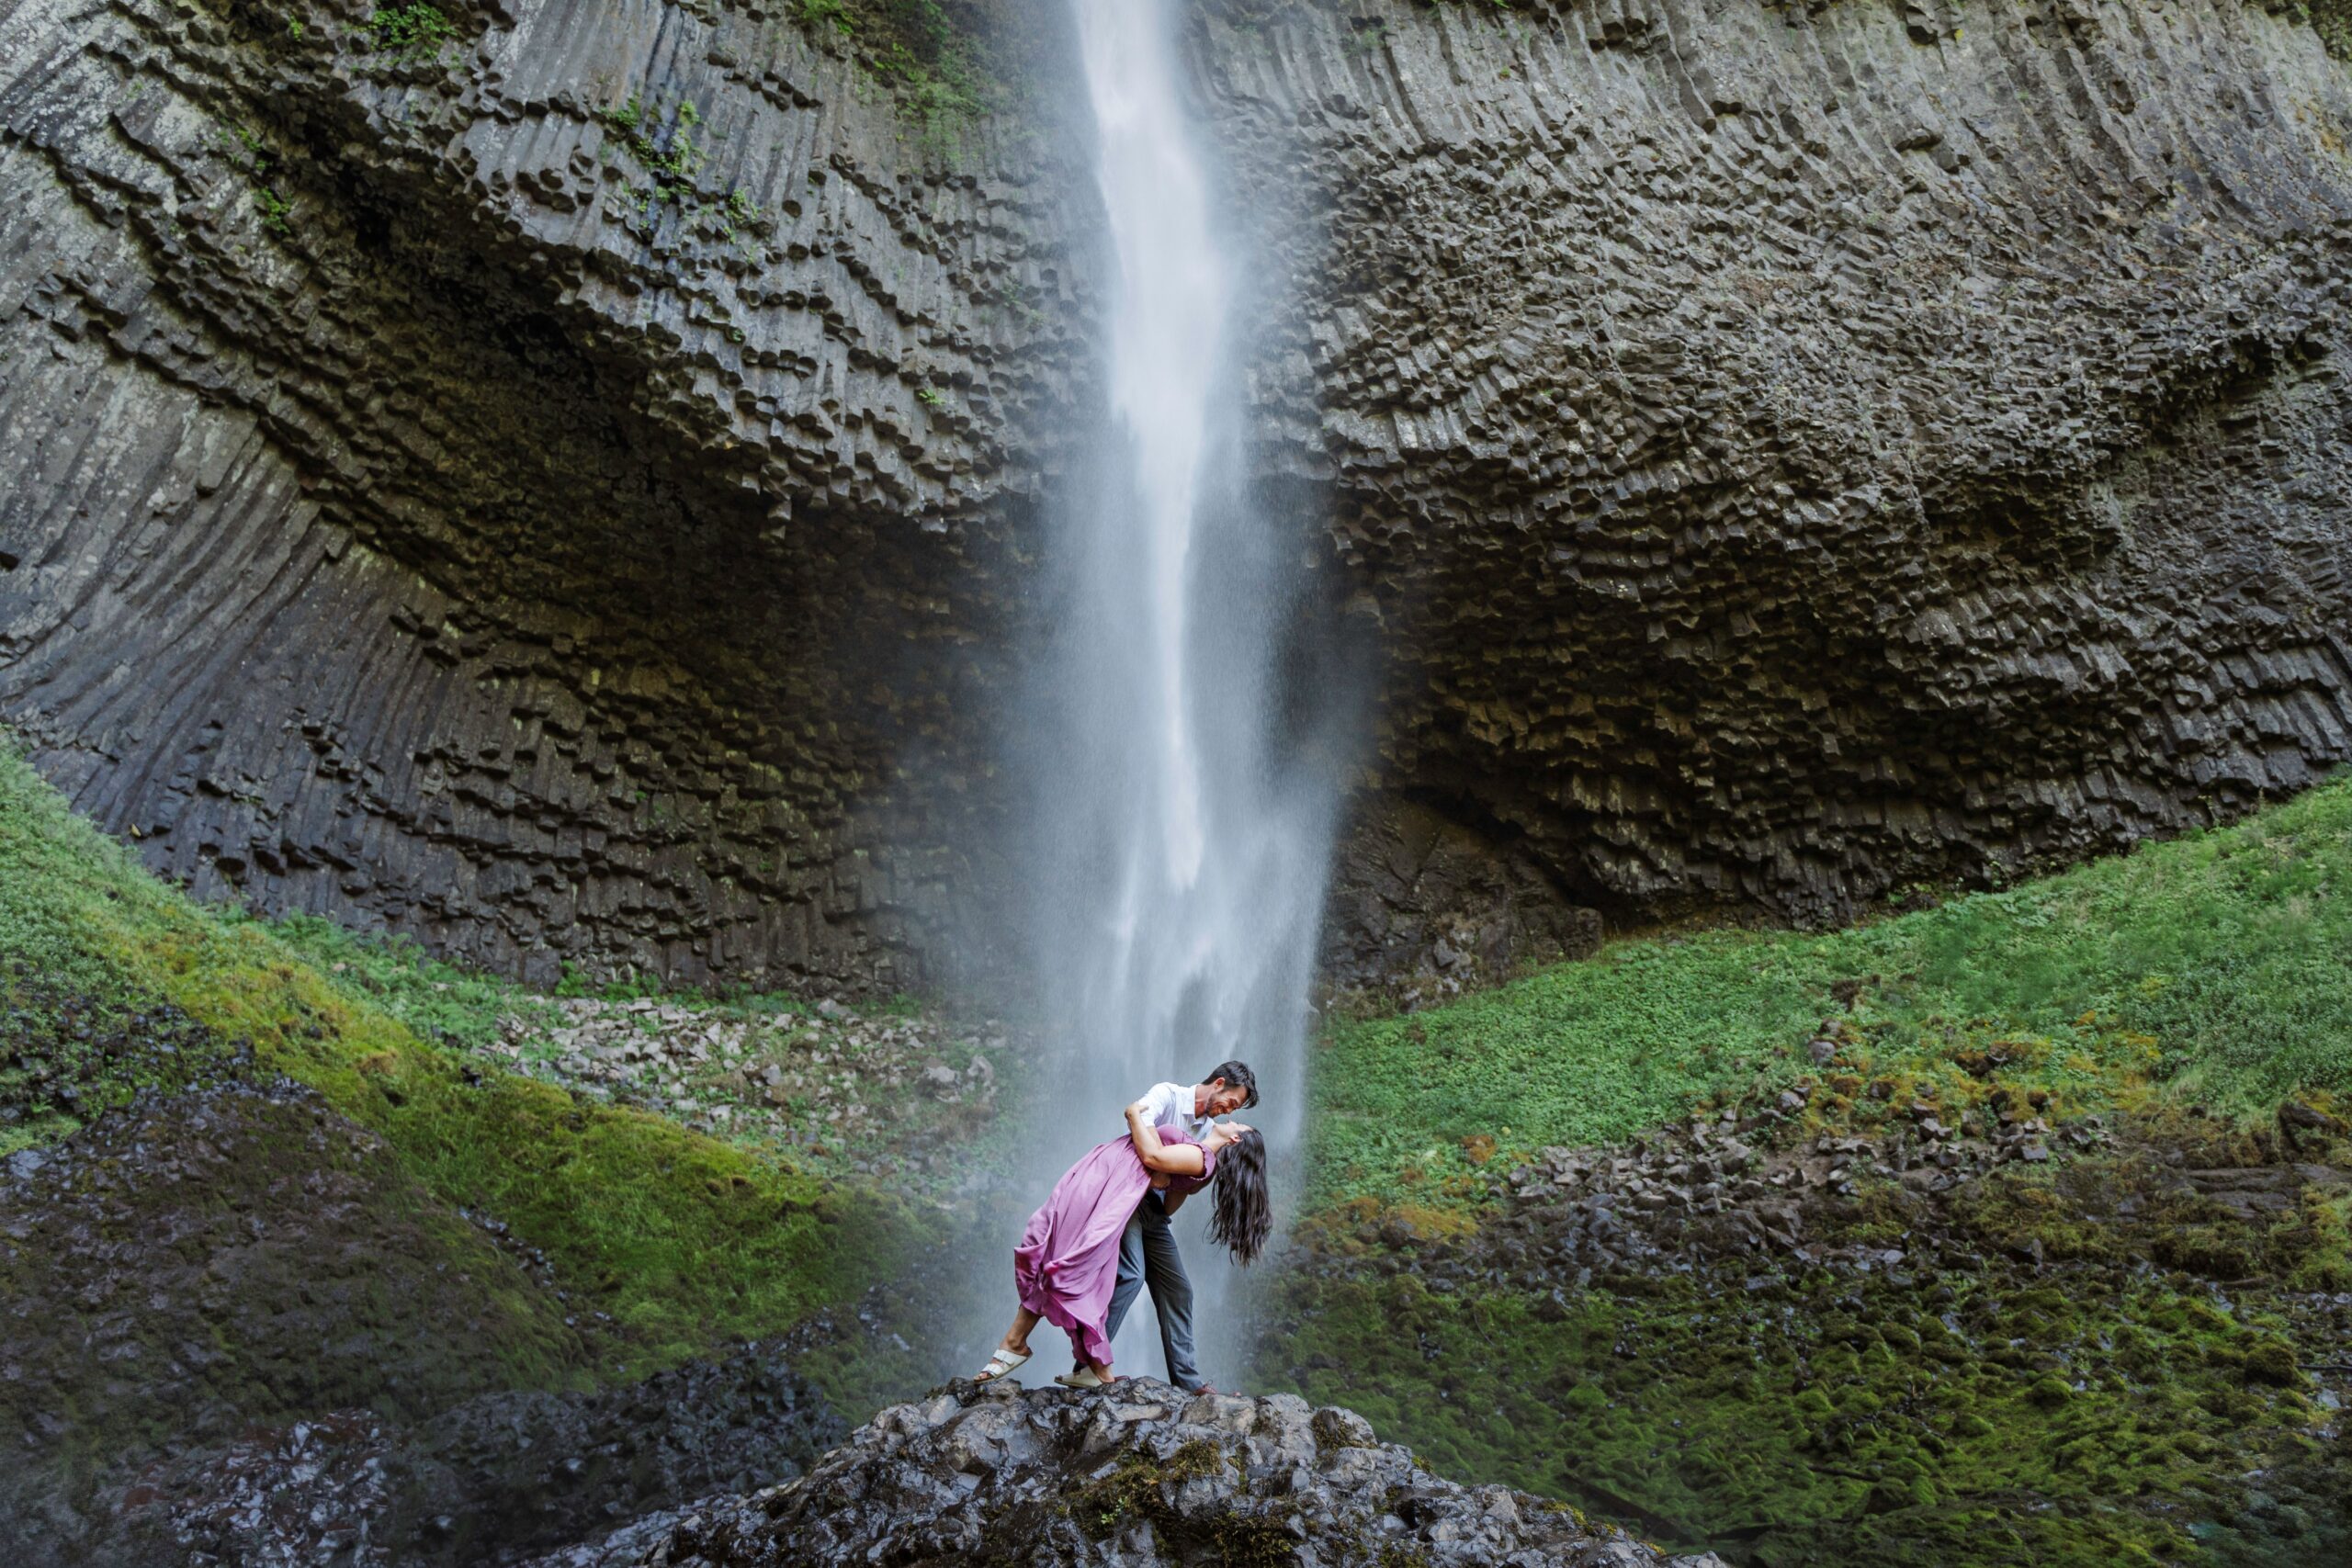 Aaron and Delanie stand on rock beneath the waterfall. Latourell Falls, a long waterfall surrounded by moss and dark basalt columns, rages behind them as Aaron dips Delanie down for a kiss.